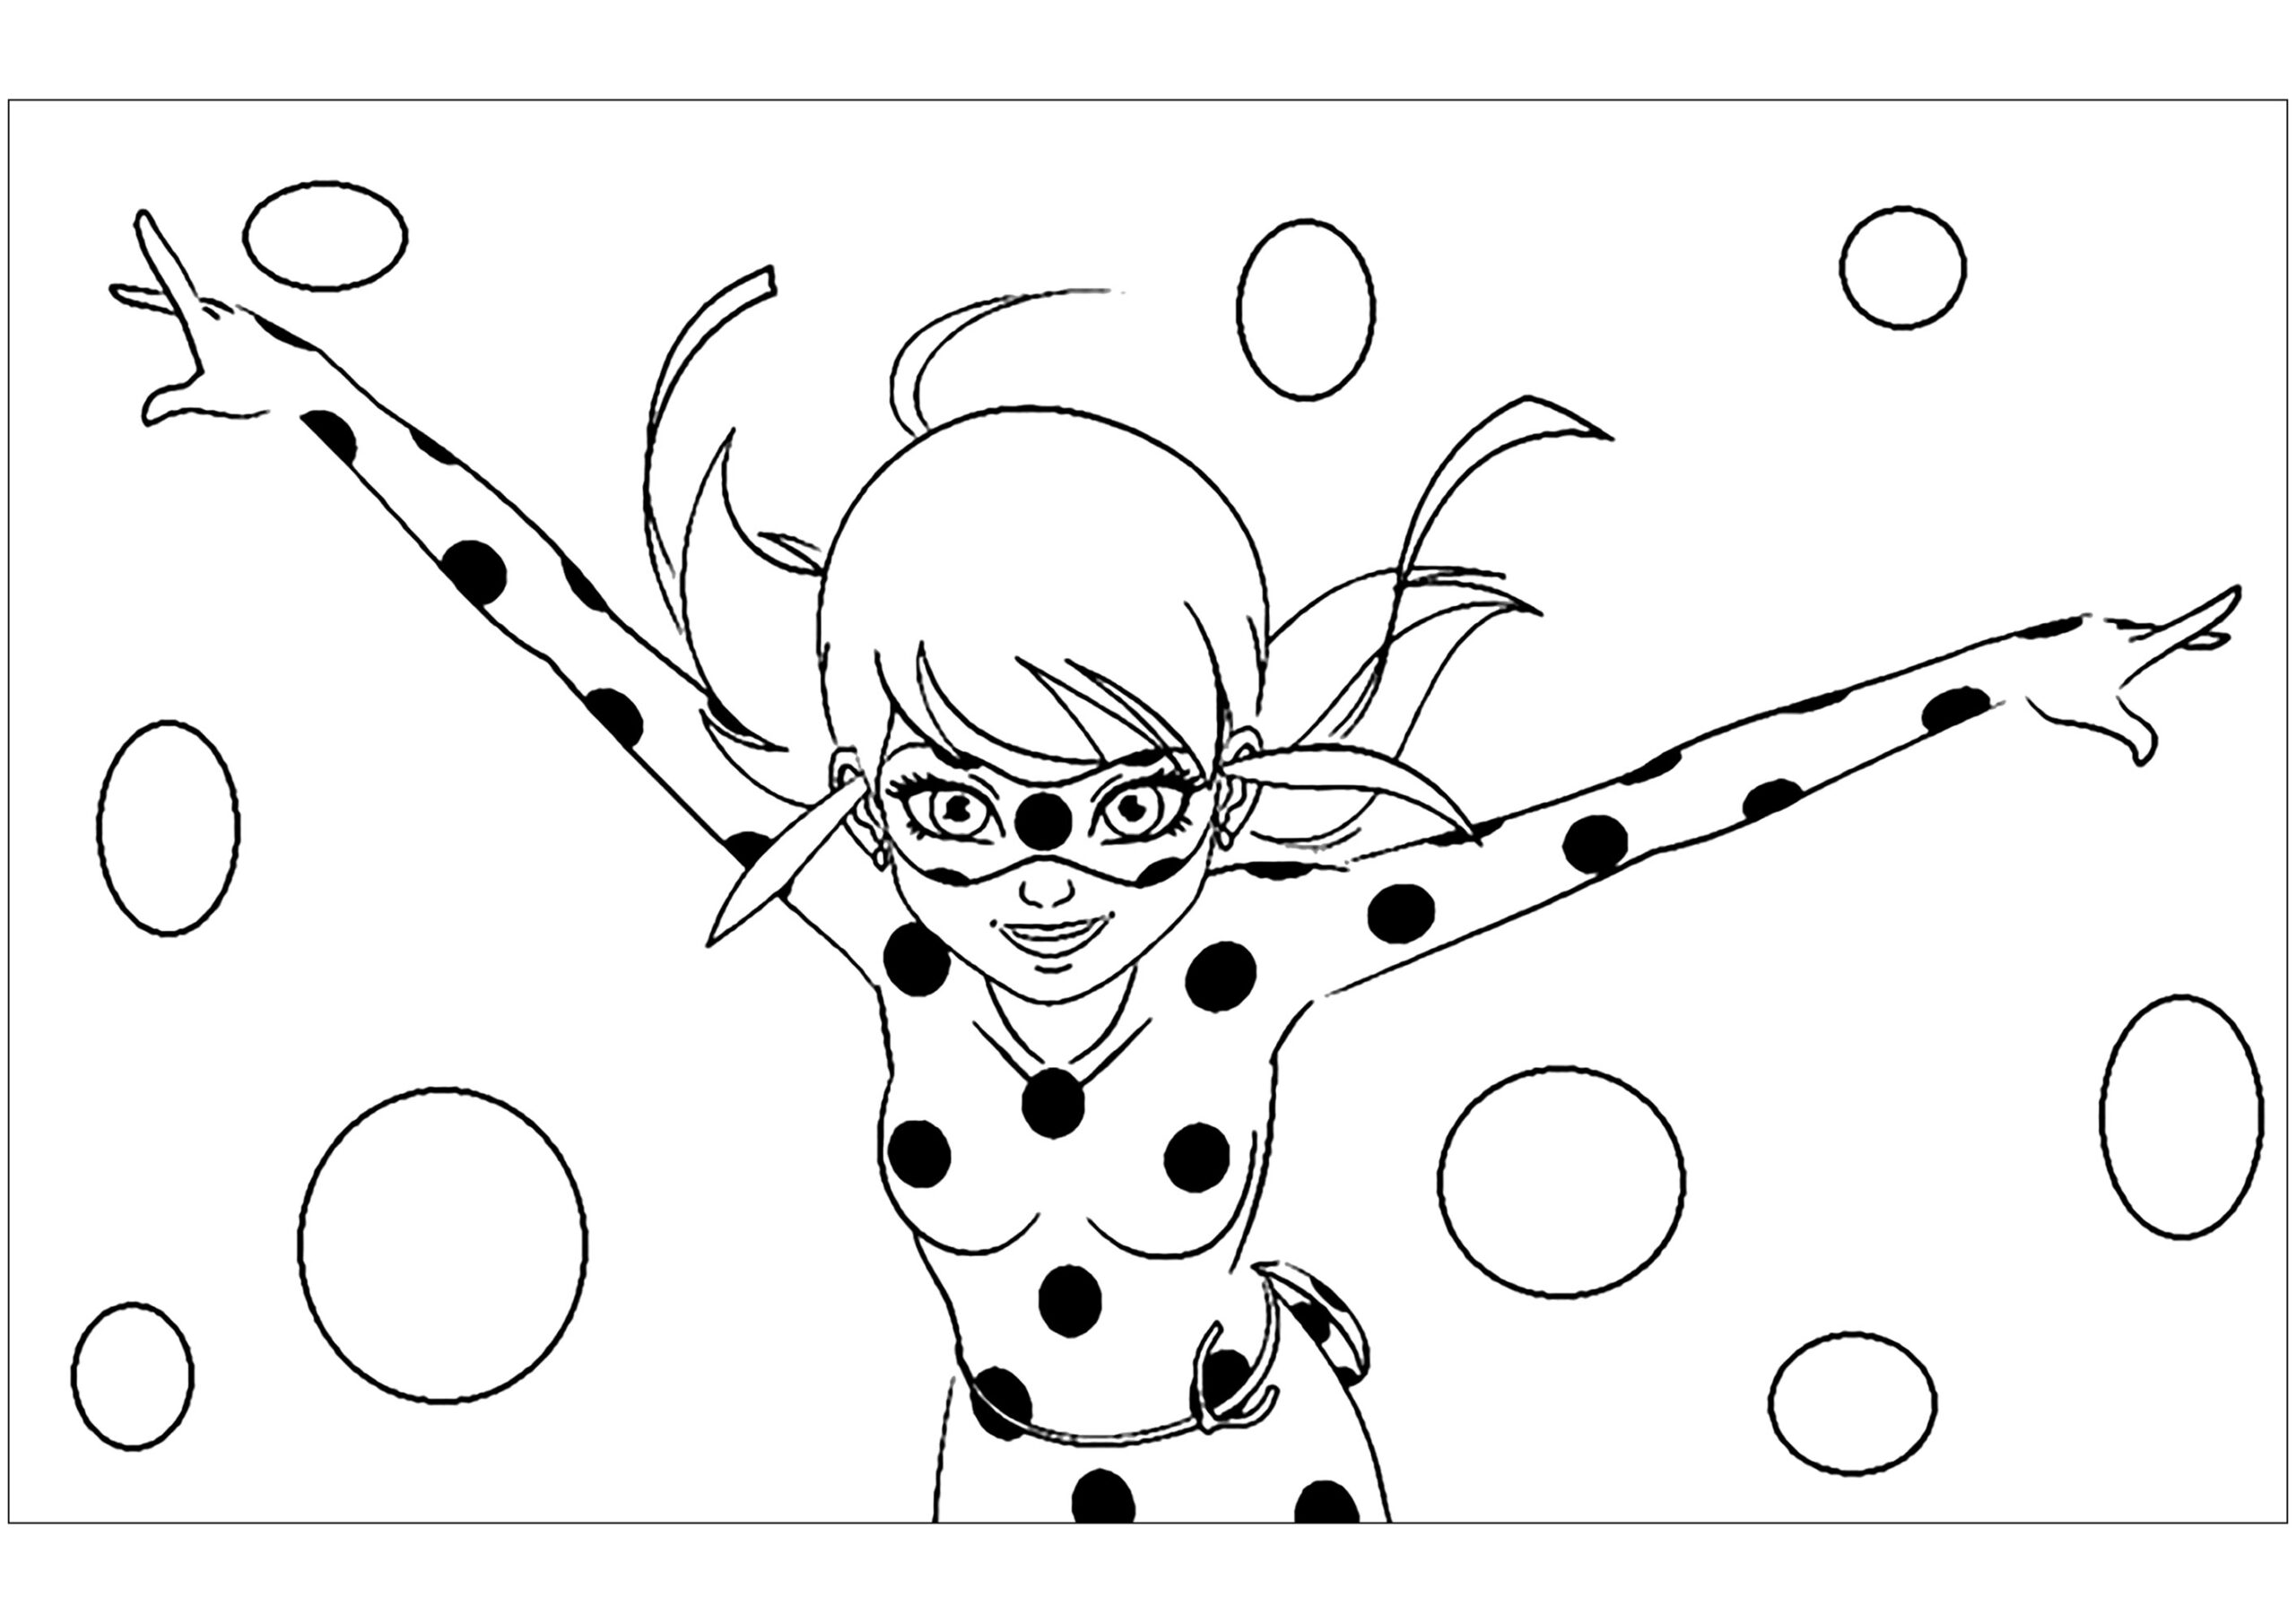 Coloriage Lady Bug / Miraculous - Coloriage Miraculous / Lady Bug Pour encequiconcerne Coloriage Miraculos